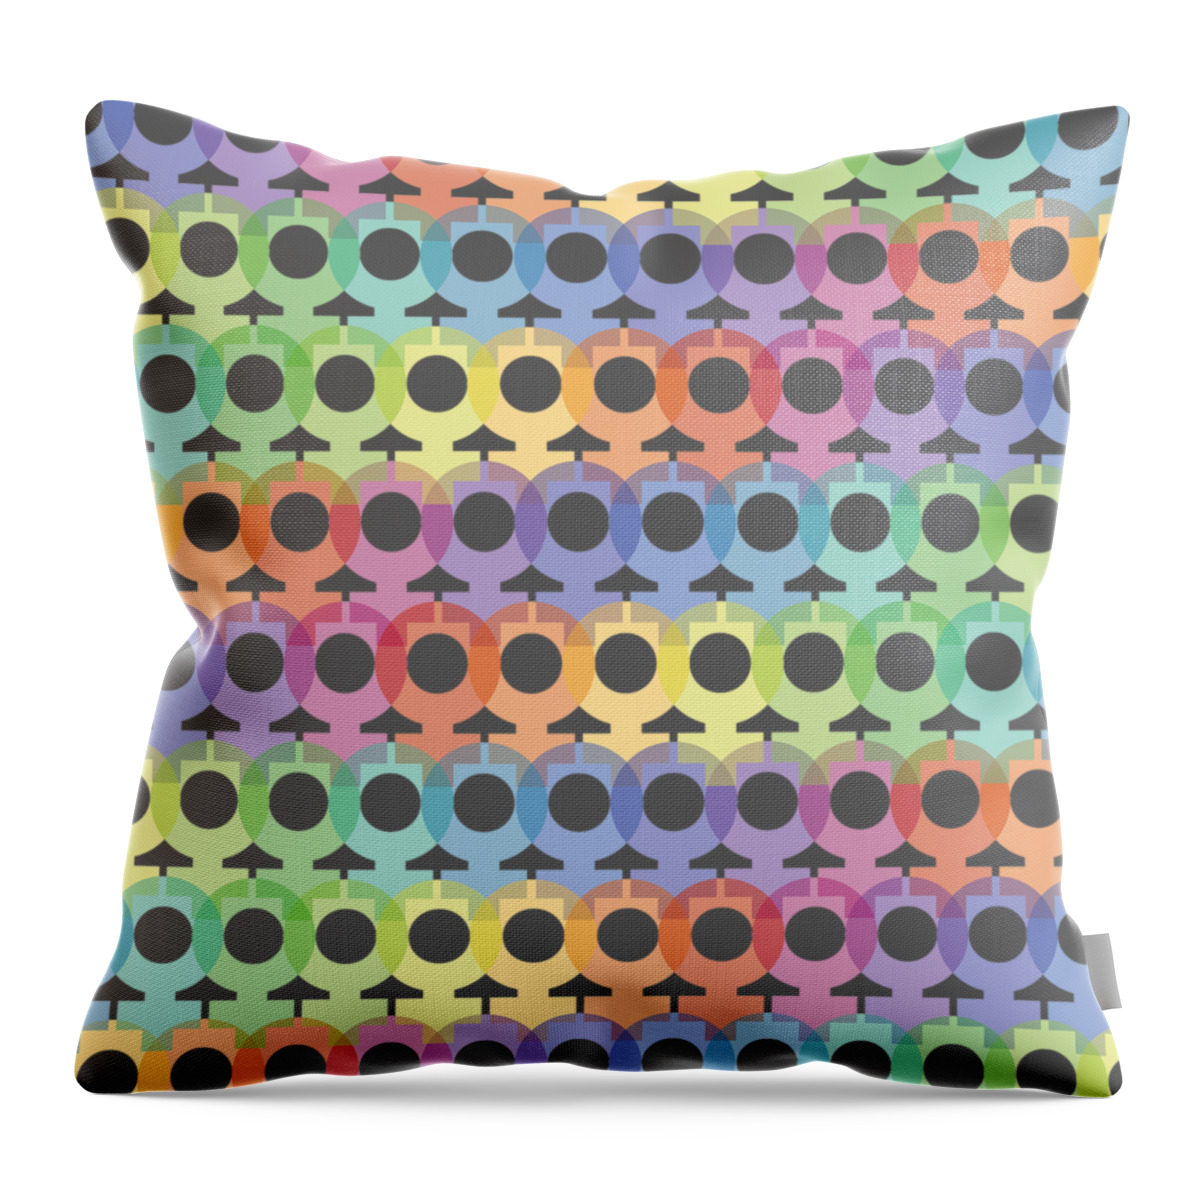 Female Throw Pillow featuring the digital art Female Sex/Gender Symbols Coalesced by Stan Magnan